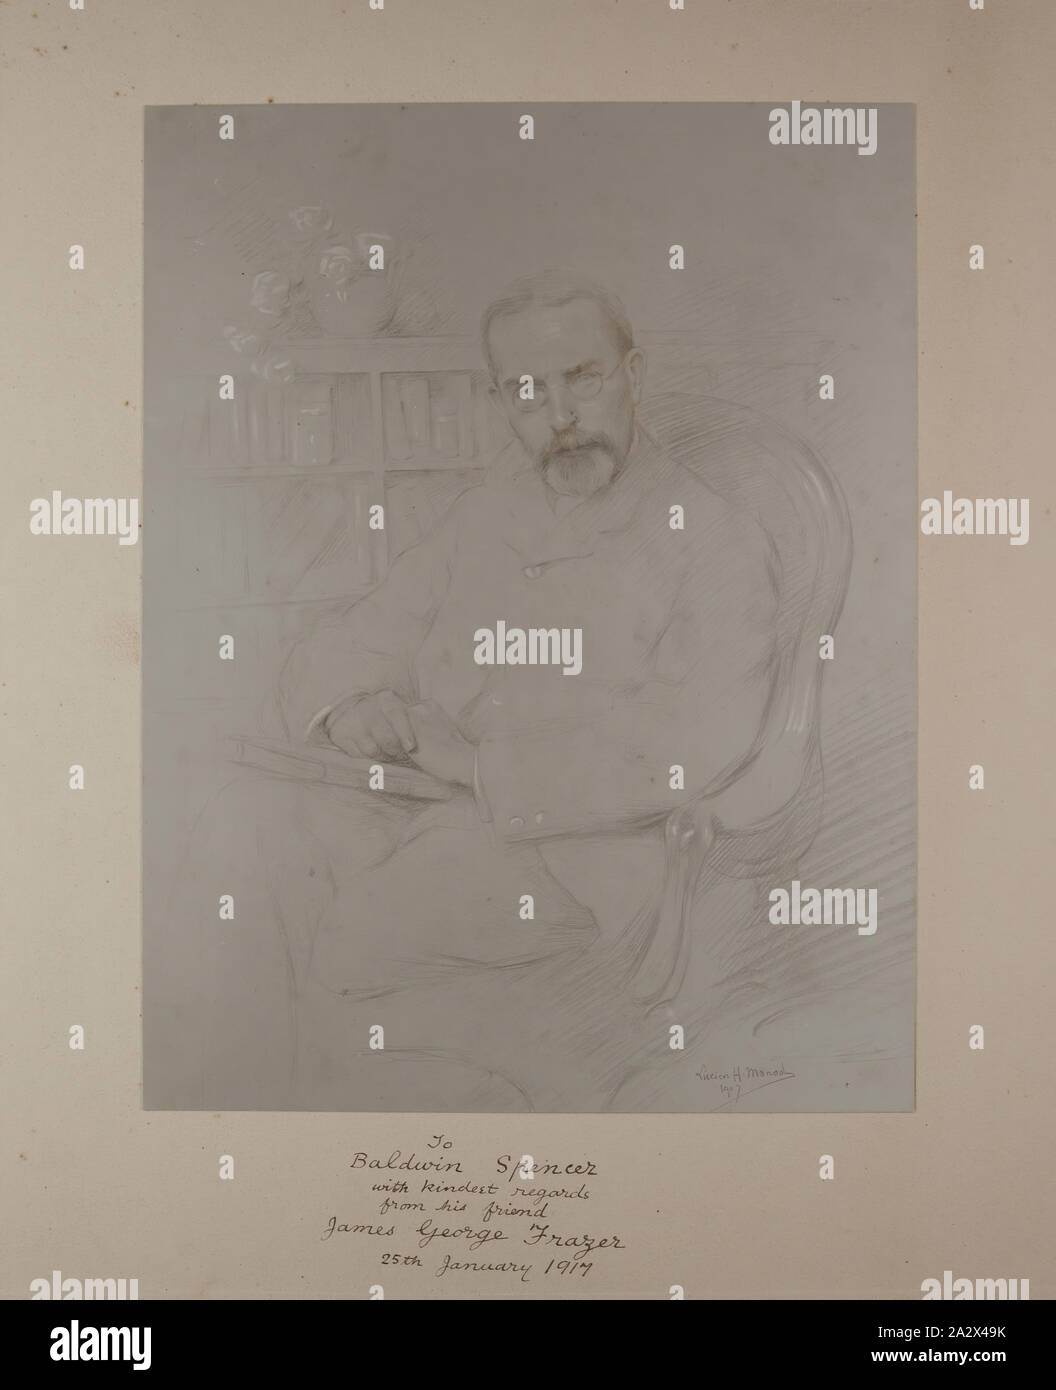 Photograph - James George Frazer Sketch by Lucien H. Monod, circa 1910, Photograph of a pencil and chalk sketch of James George Frazer by French artist Lucien Hector Monod created in 1907. James Frazer engaged the photographer Paul Laib in South Kensington who specialised in fine art photography to reproduce the artwork for Frazer to distribute amongst his influential friends including Baldwin Spencer Stock Photo